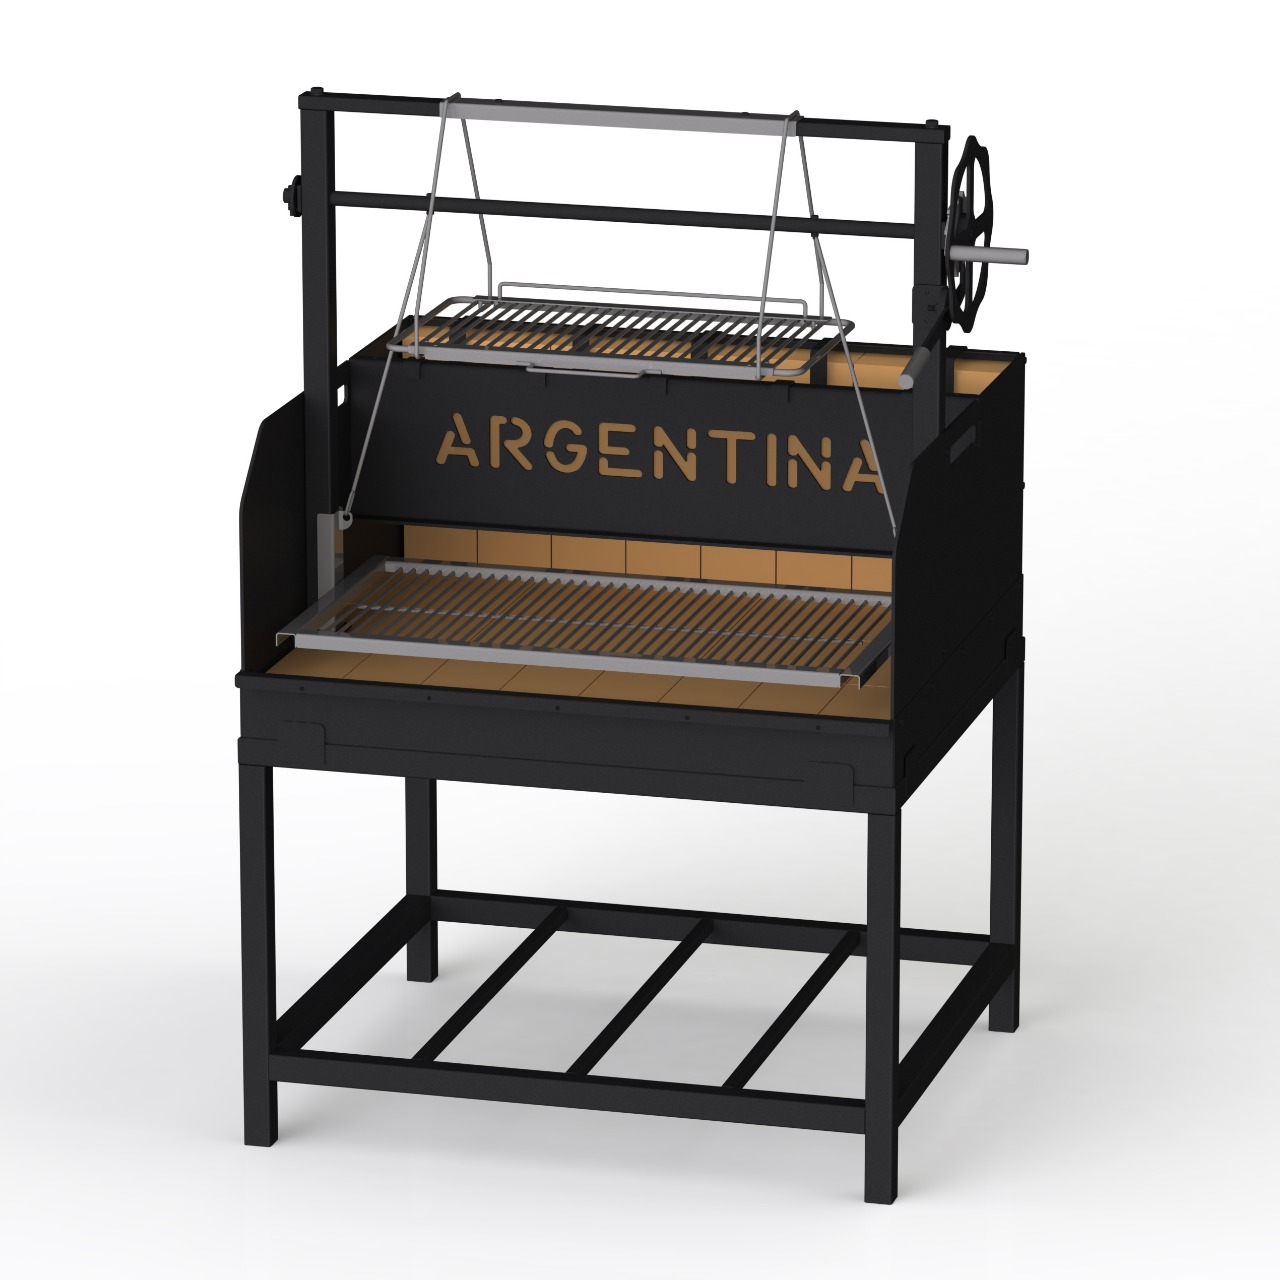 ARGENTINA open grill